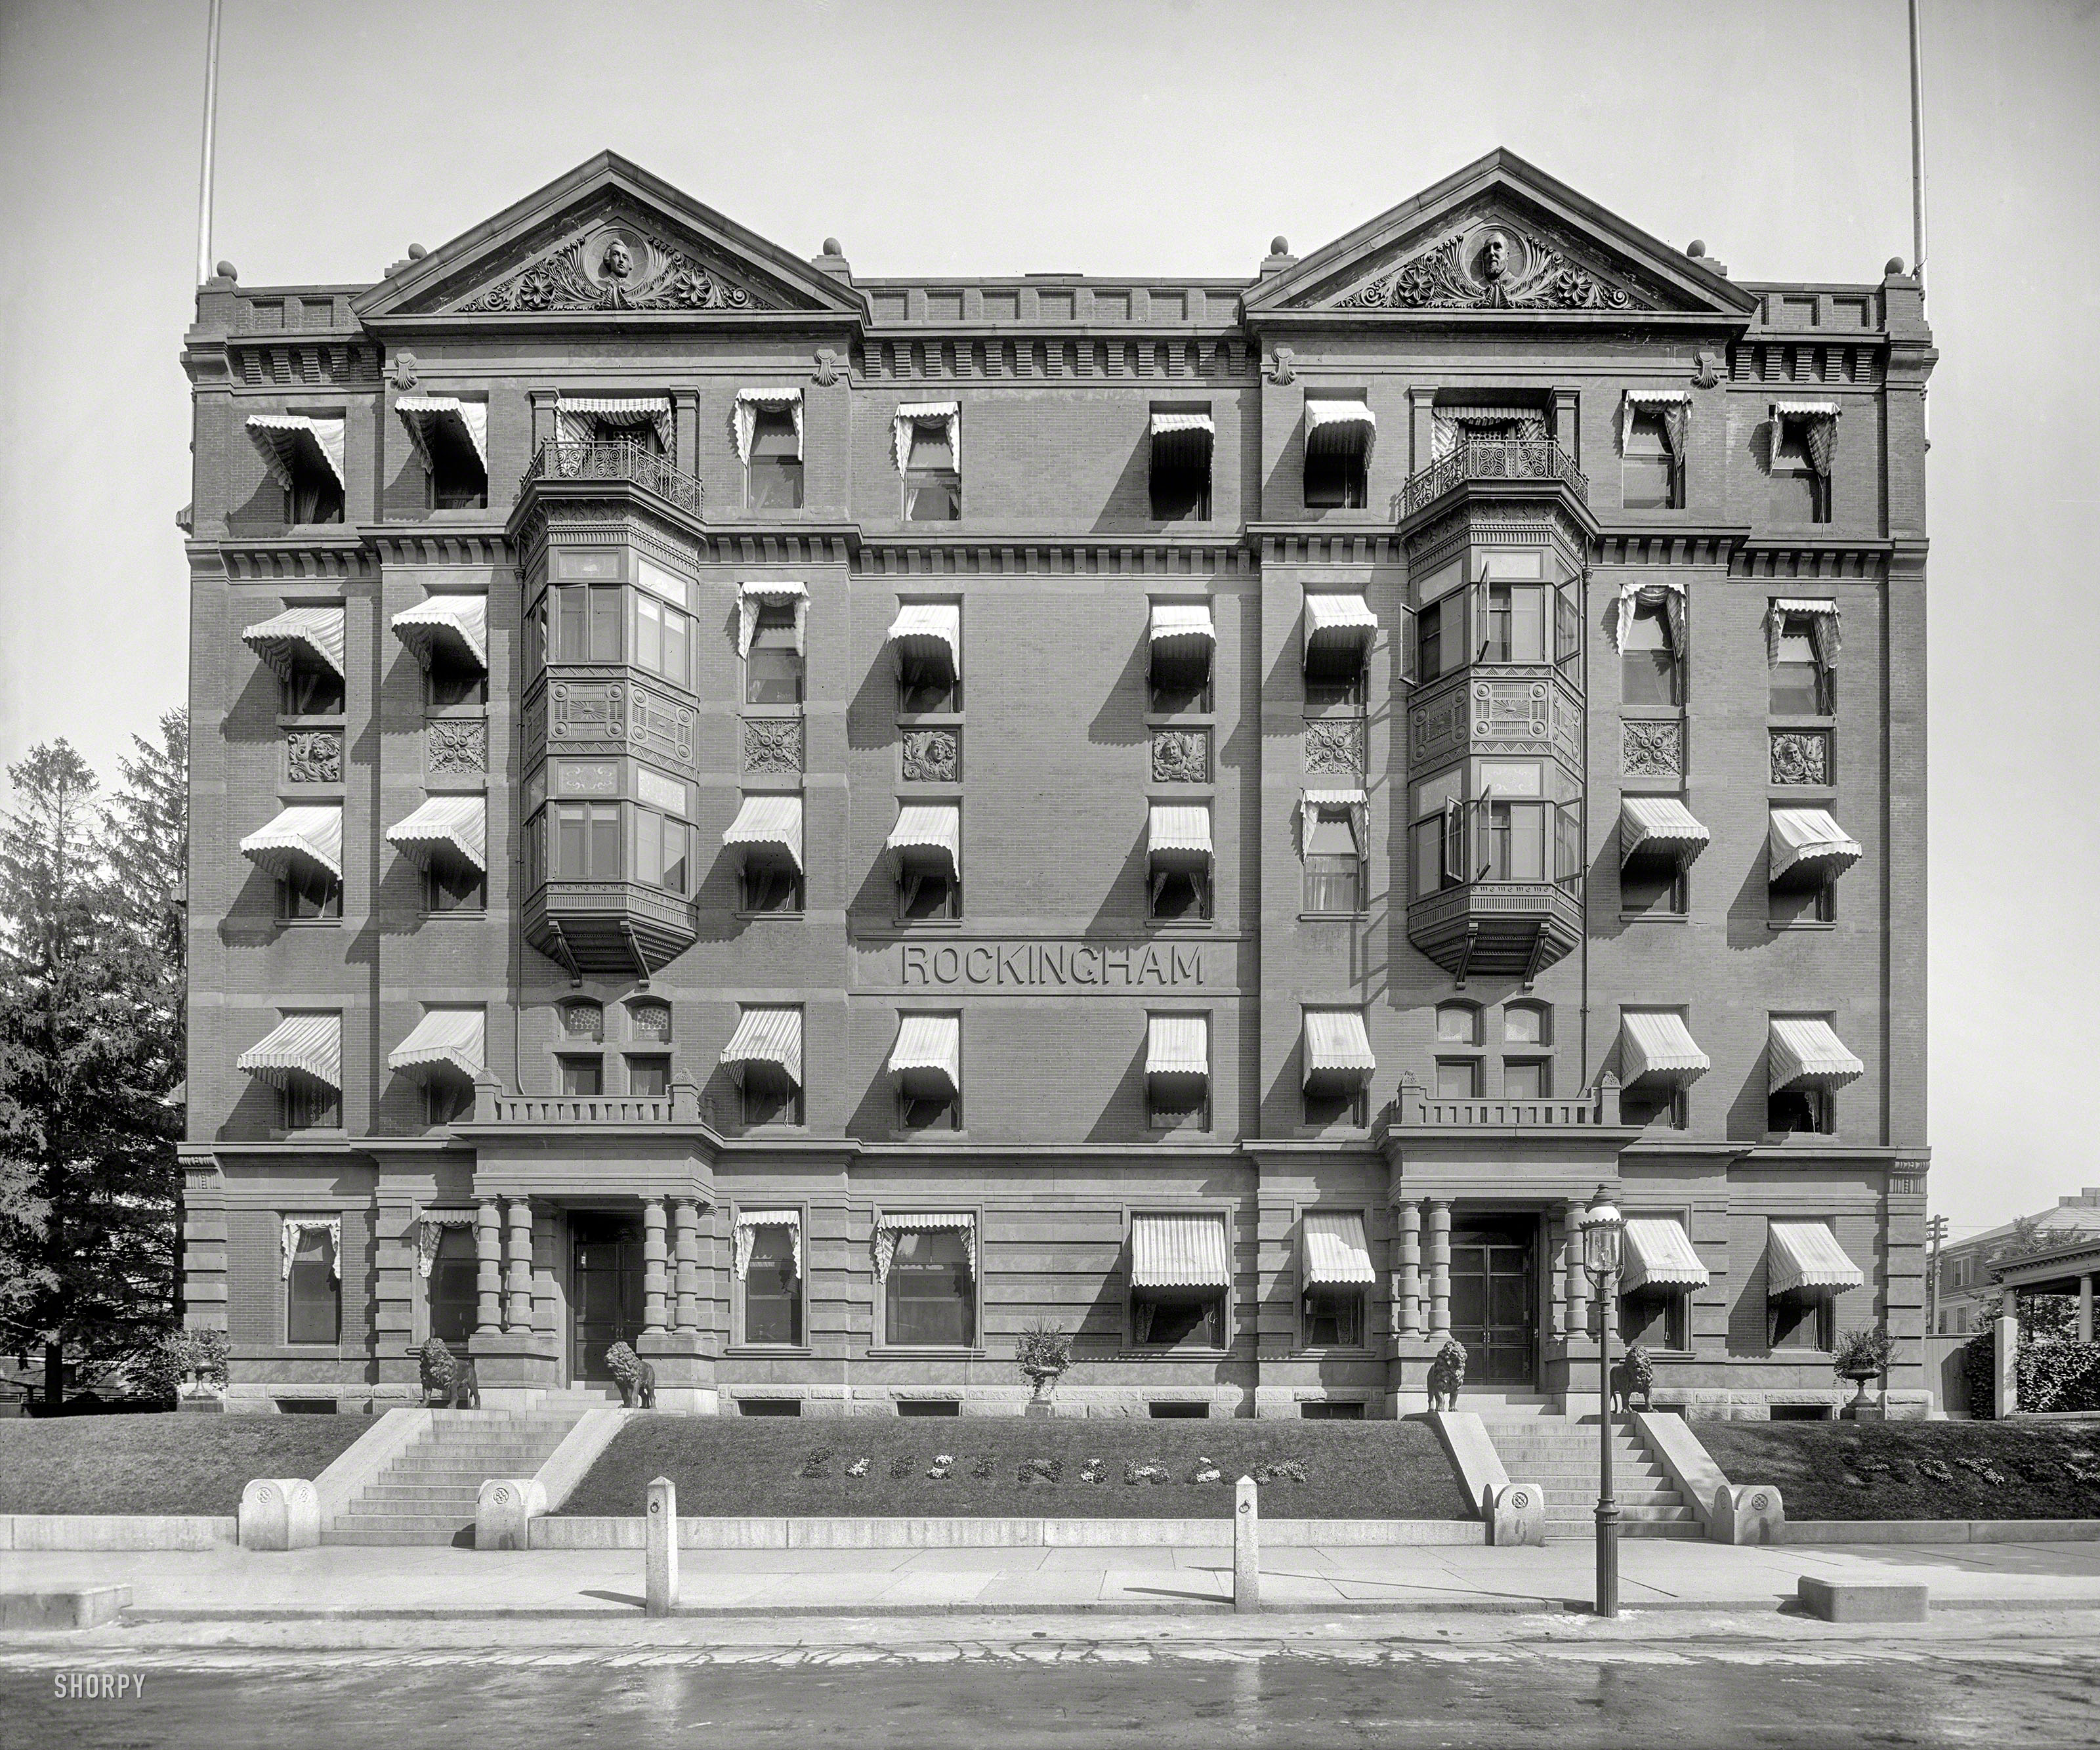 1908. "Rockingham Hotel, Portsmouth, New Hampshire." 8x10 inch dry plate glass negative, Detroit Publishing Company. View full size.